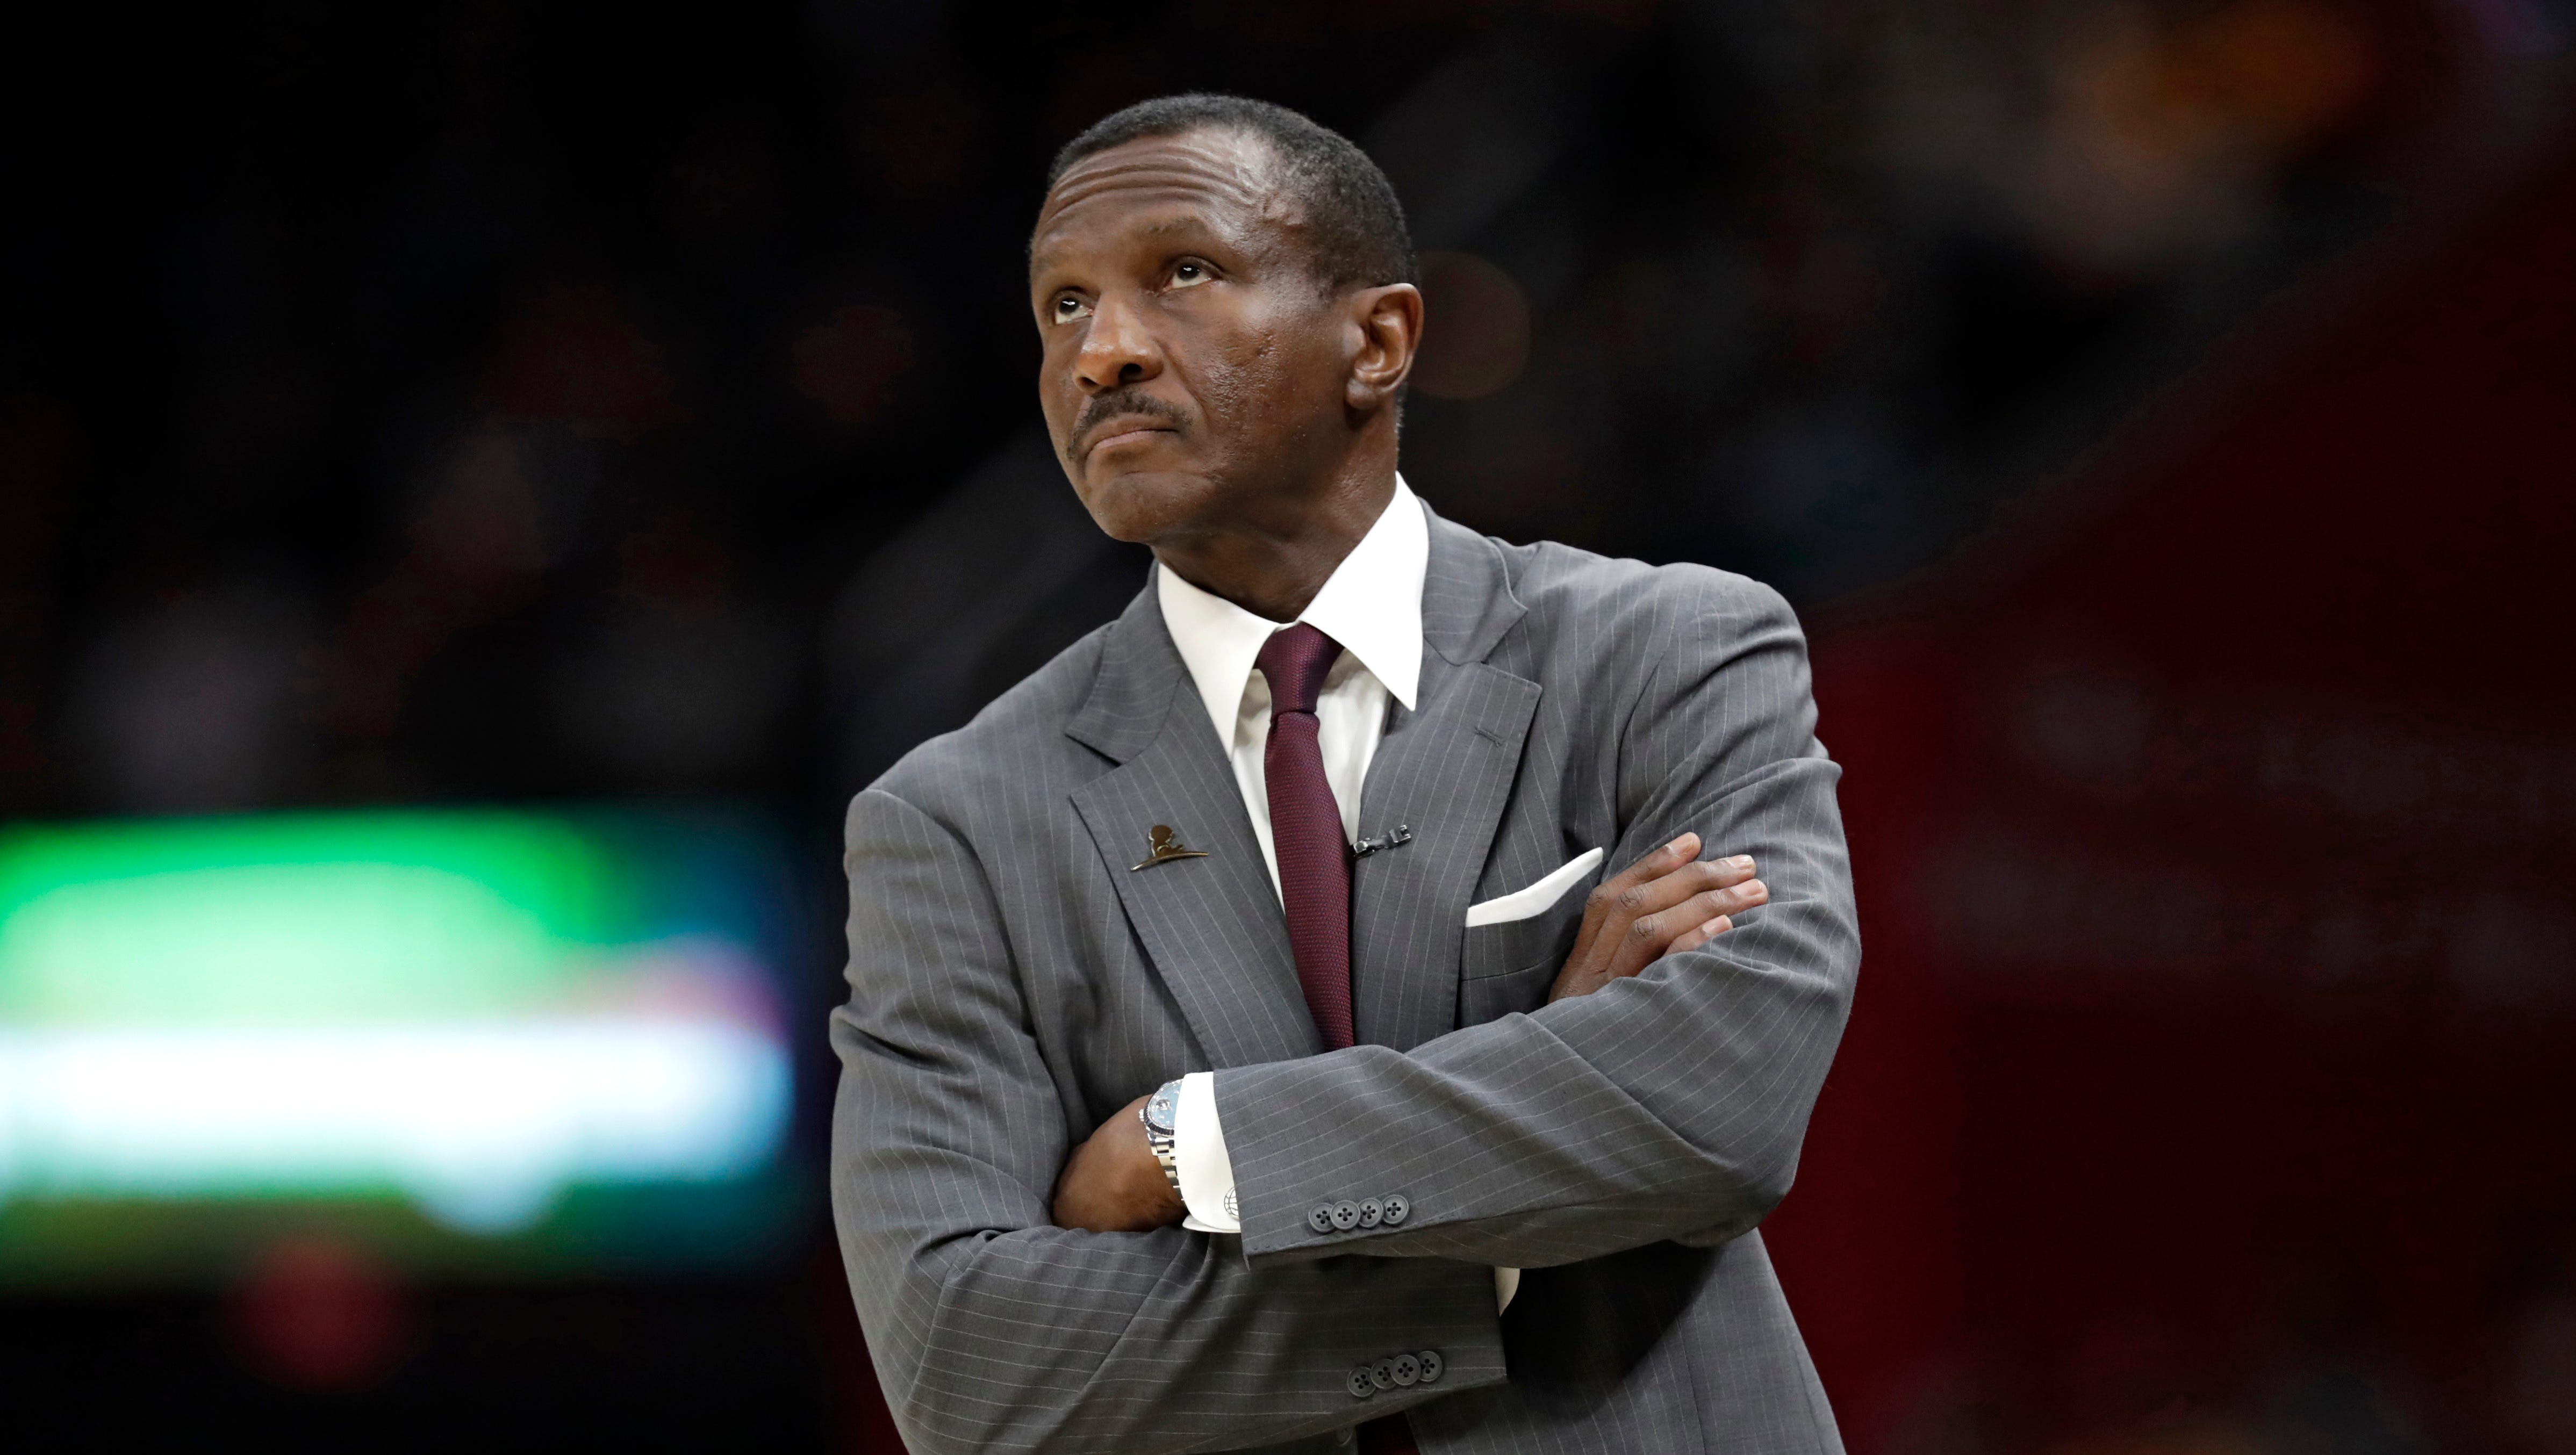 Toronto Raptors head coach Dwane Casey looks up in the first half of an NBA basketball game against the Cleveland Cavaliers, Wednesday, March 21, 2018, in Cleveland.